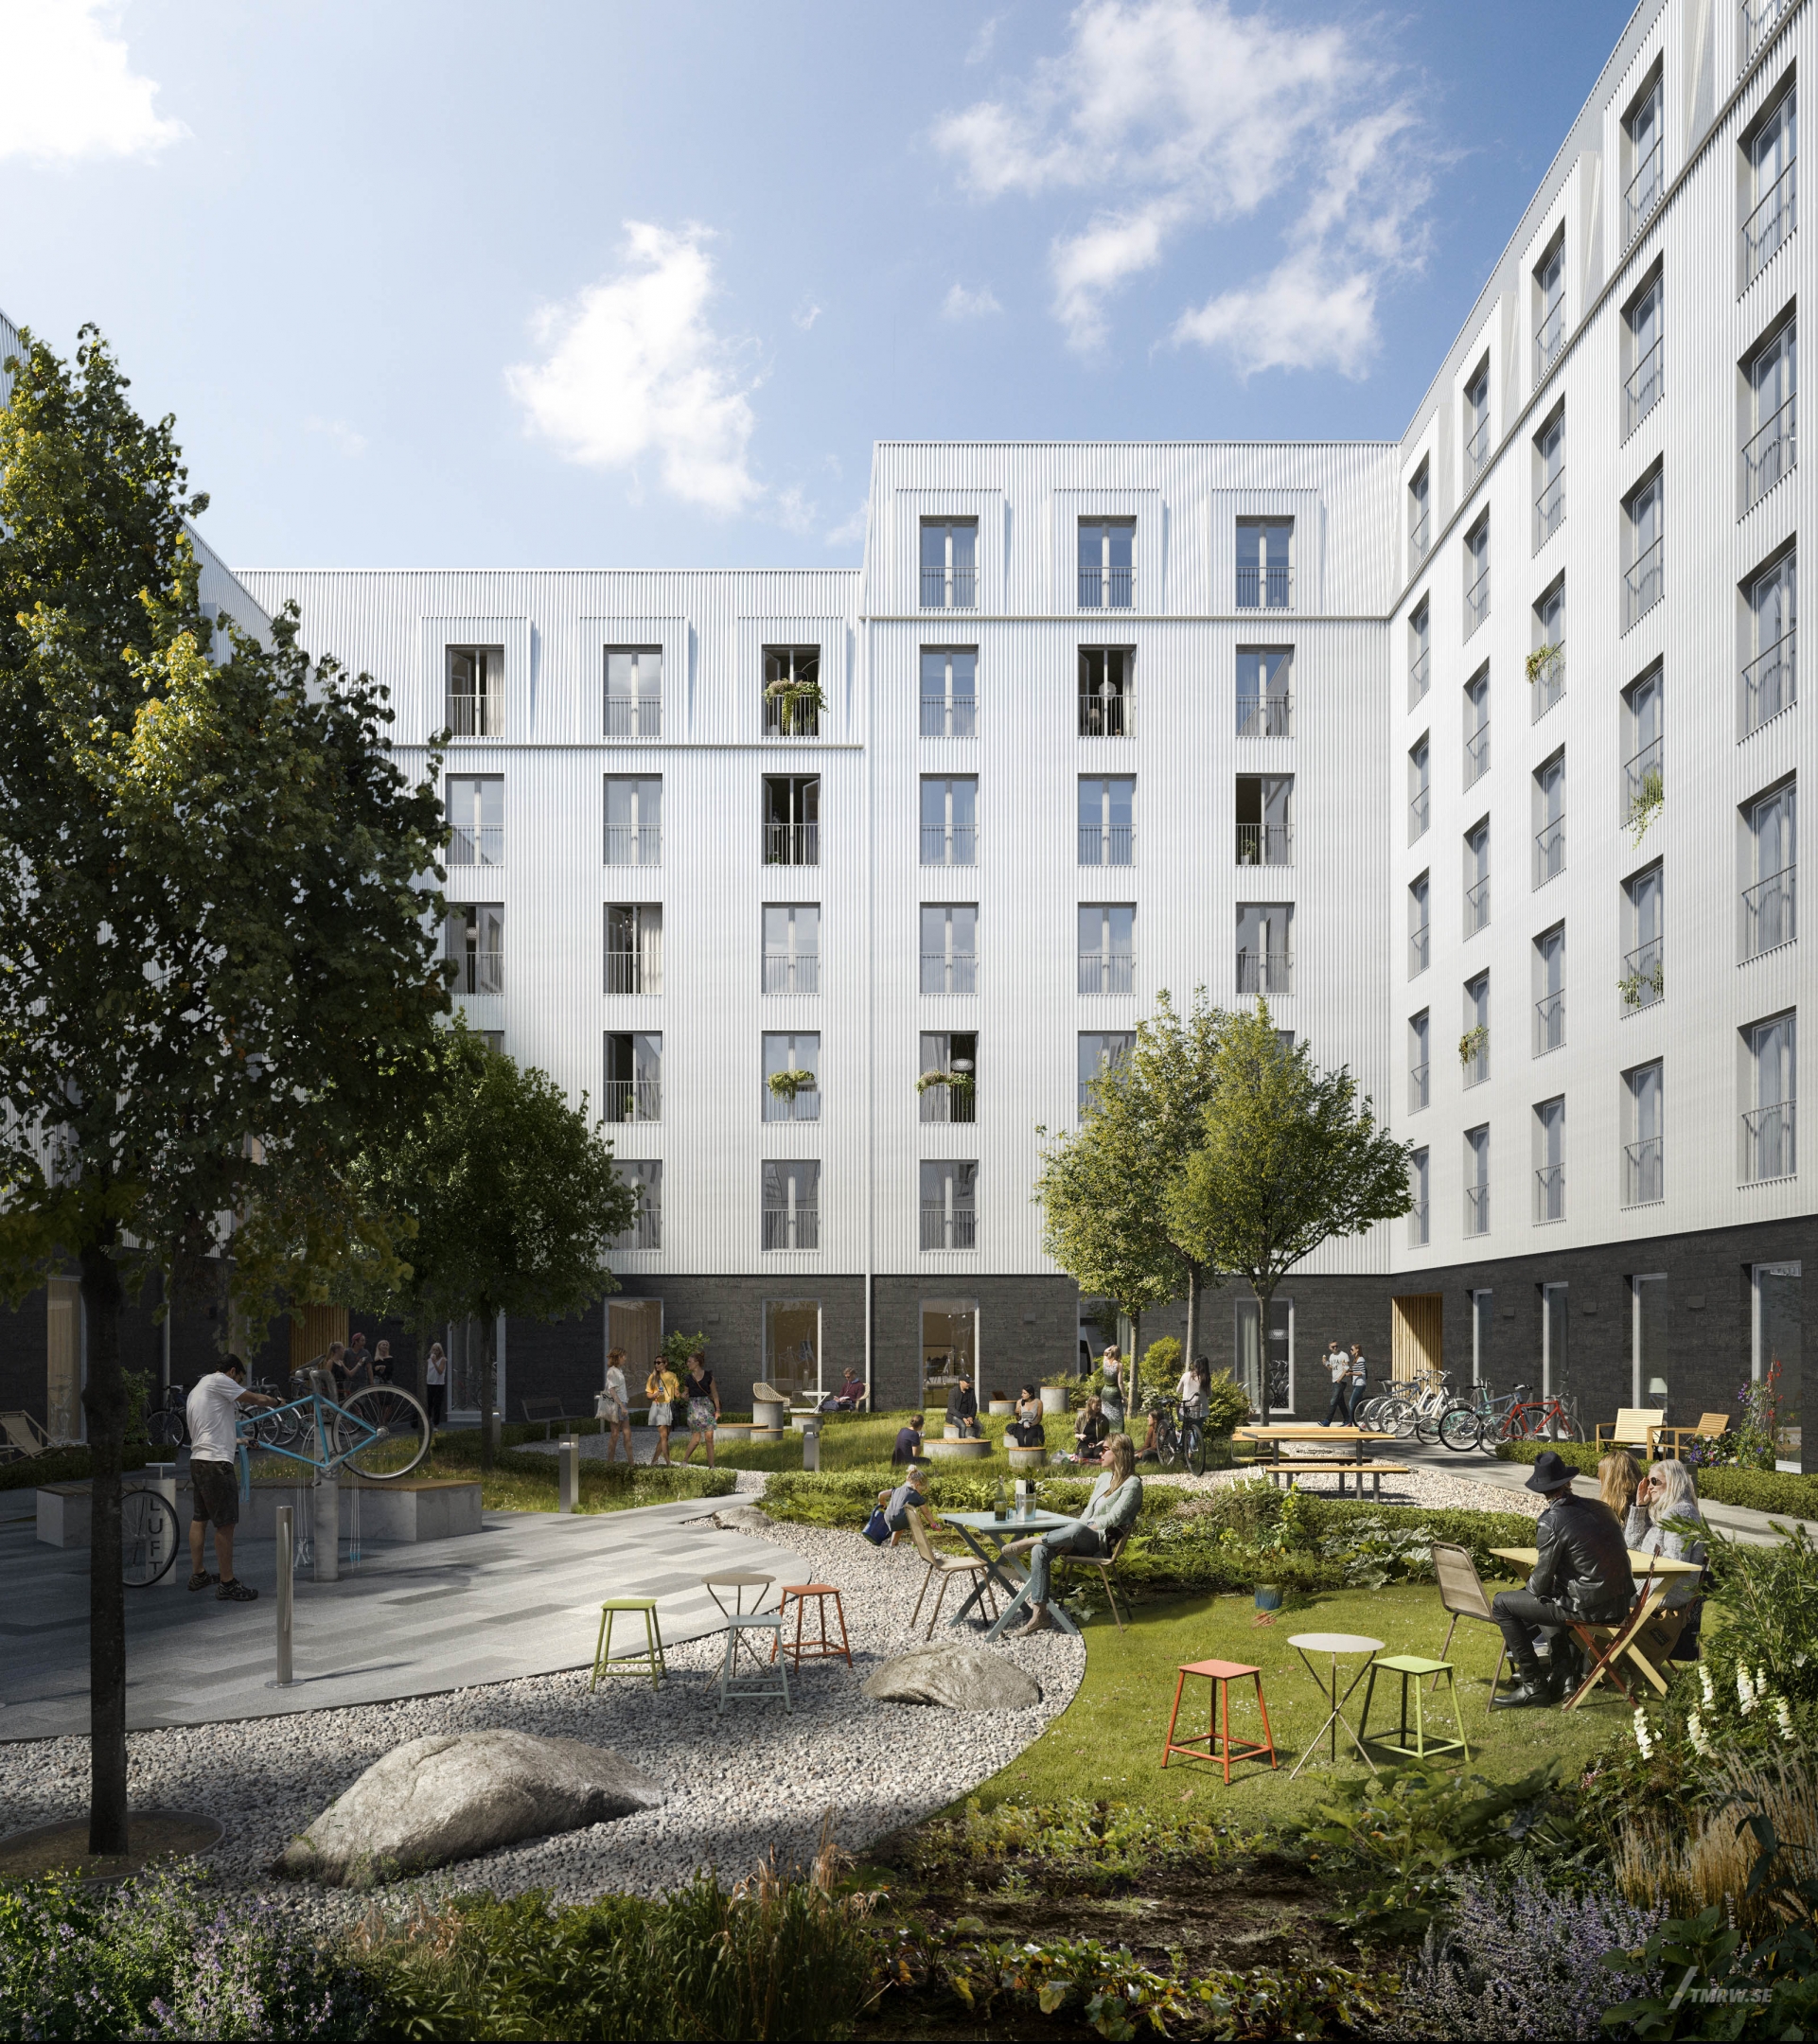 Architectural visualization of Aranas for Skanska, White, residential area with people socializing outside